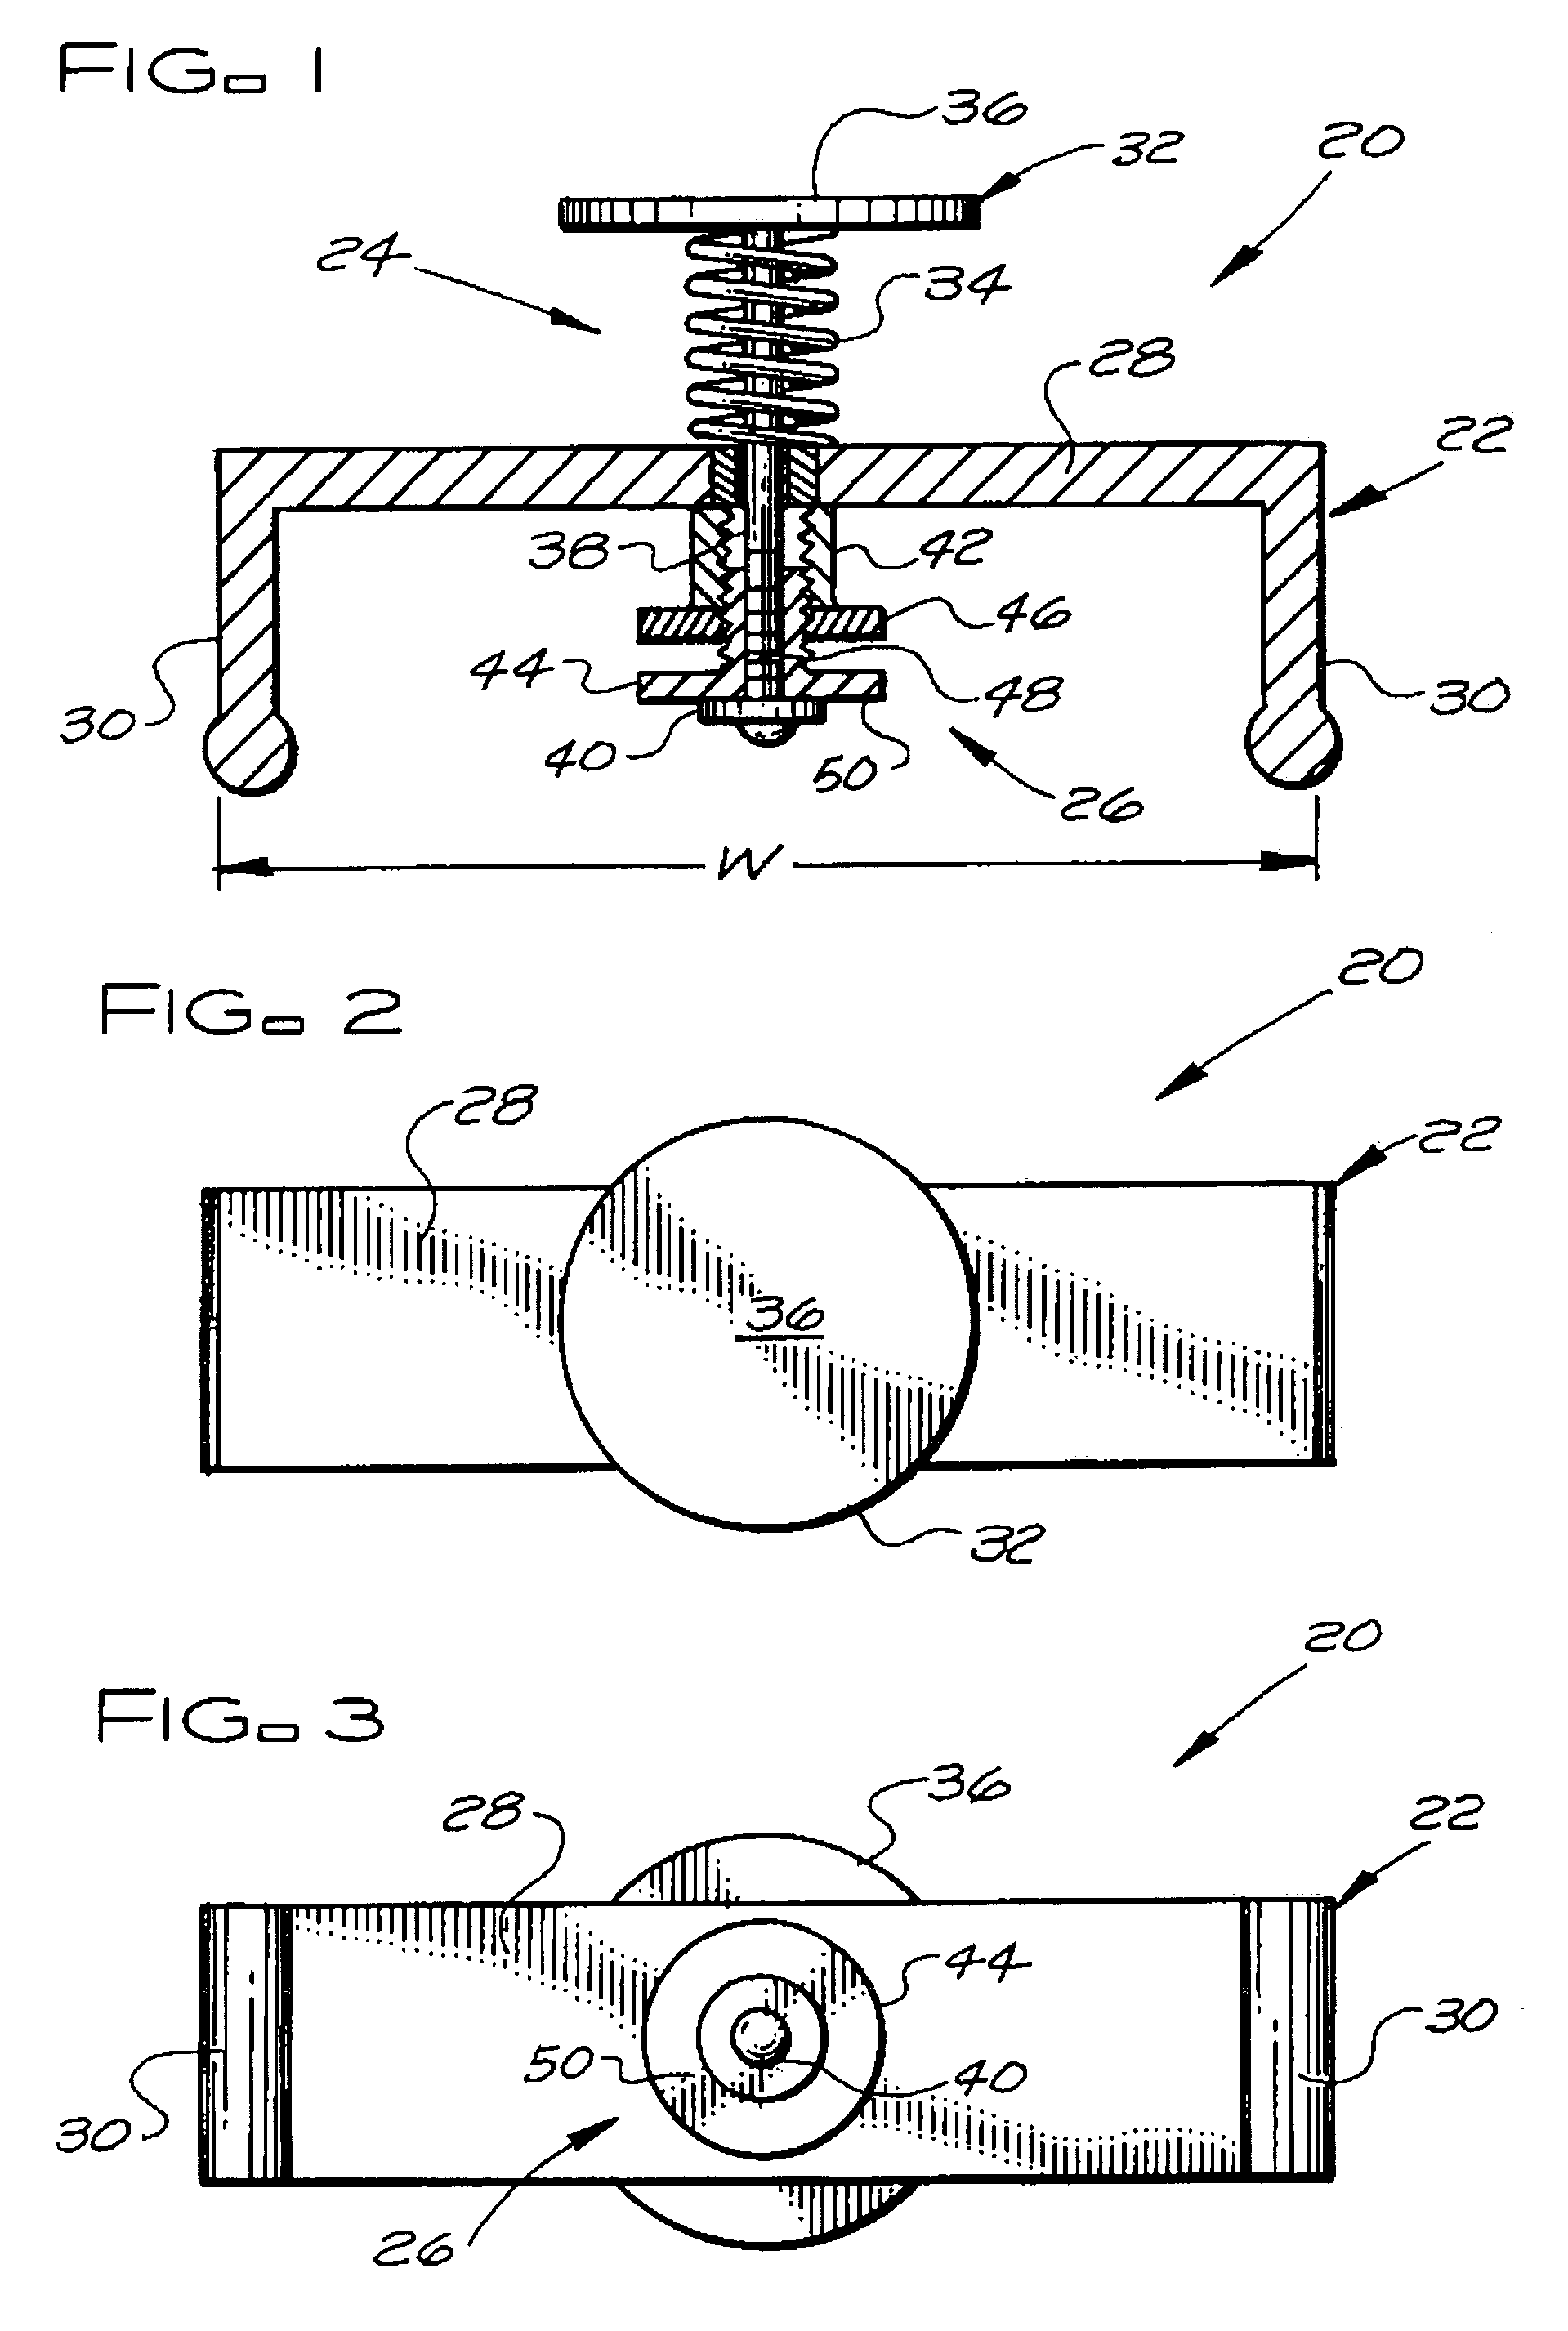 Gauge and method for indicating one or more properties of a loose-fill insulation